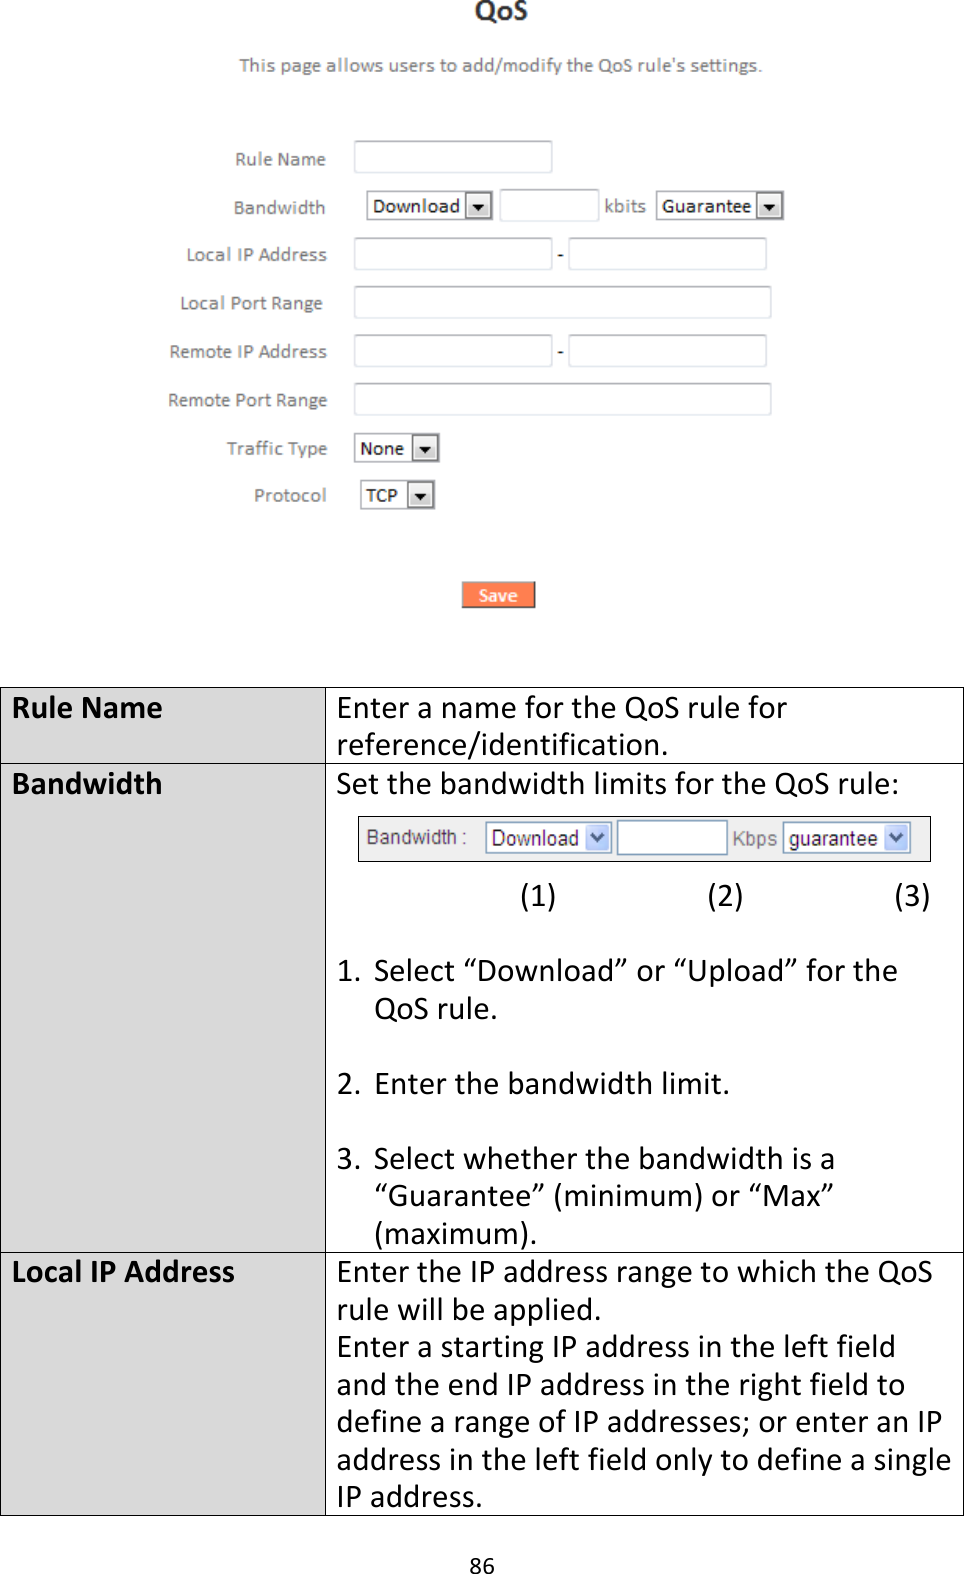 86   Rule Name Enter a name for the QoS rule for reference/identification. Bandwidth Set the bandwidth limits for the QoS rule:             (1)         (2)         (3)  1. Select “Download” or “Upload” for the QoS rule.  2. Enter the bandwidth limit.  3. Select whether the bandwidth is a “Guarantee” (minimum) or “Max” (maximum). Local IP Address Enter the IP address range to which the QoS rule will be applied. Enter a starting IP address in the left field and the end IP address in the right field to define a range of IP addresses; or enter an IP address in the left field only to define a single IP address. 